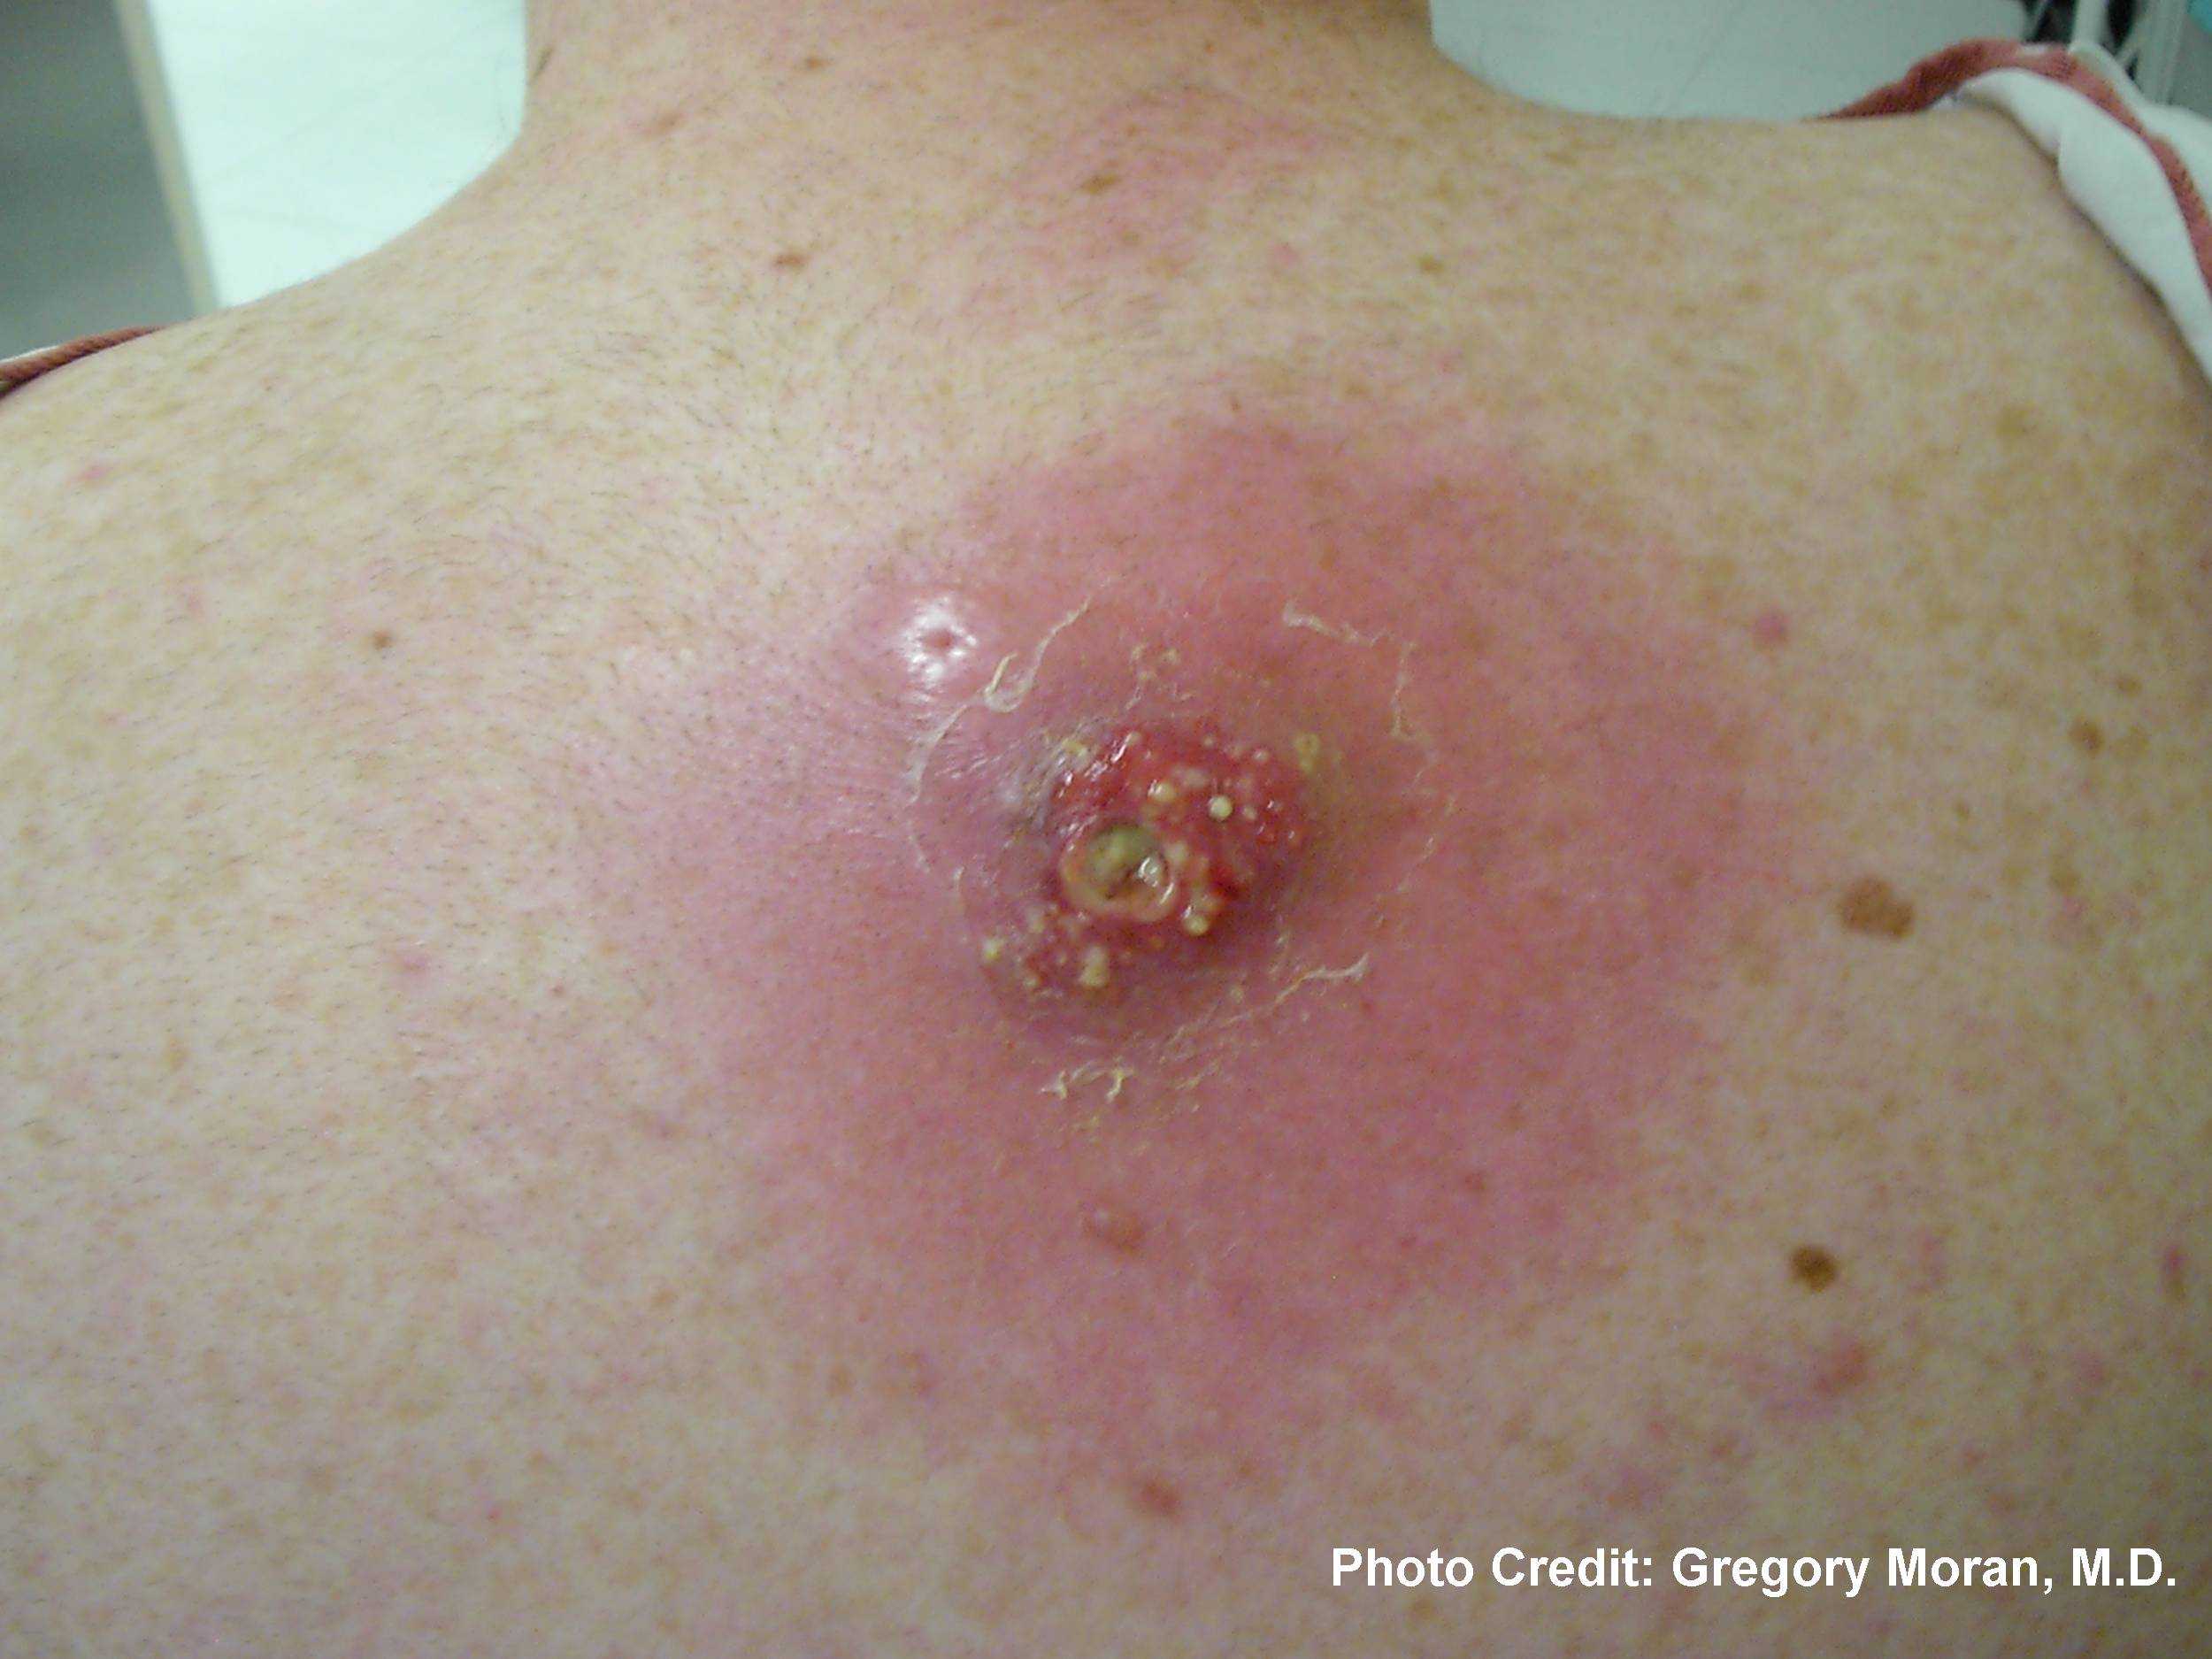 Cutaneous abscess located on the back